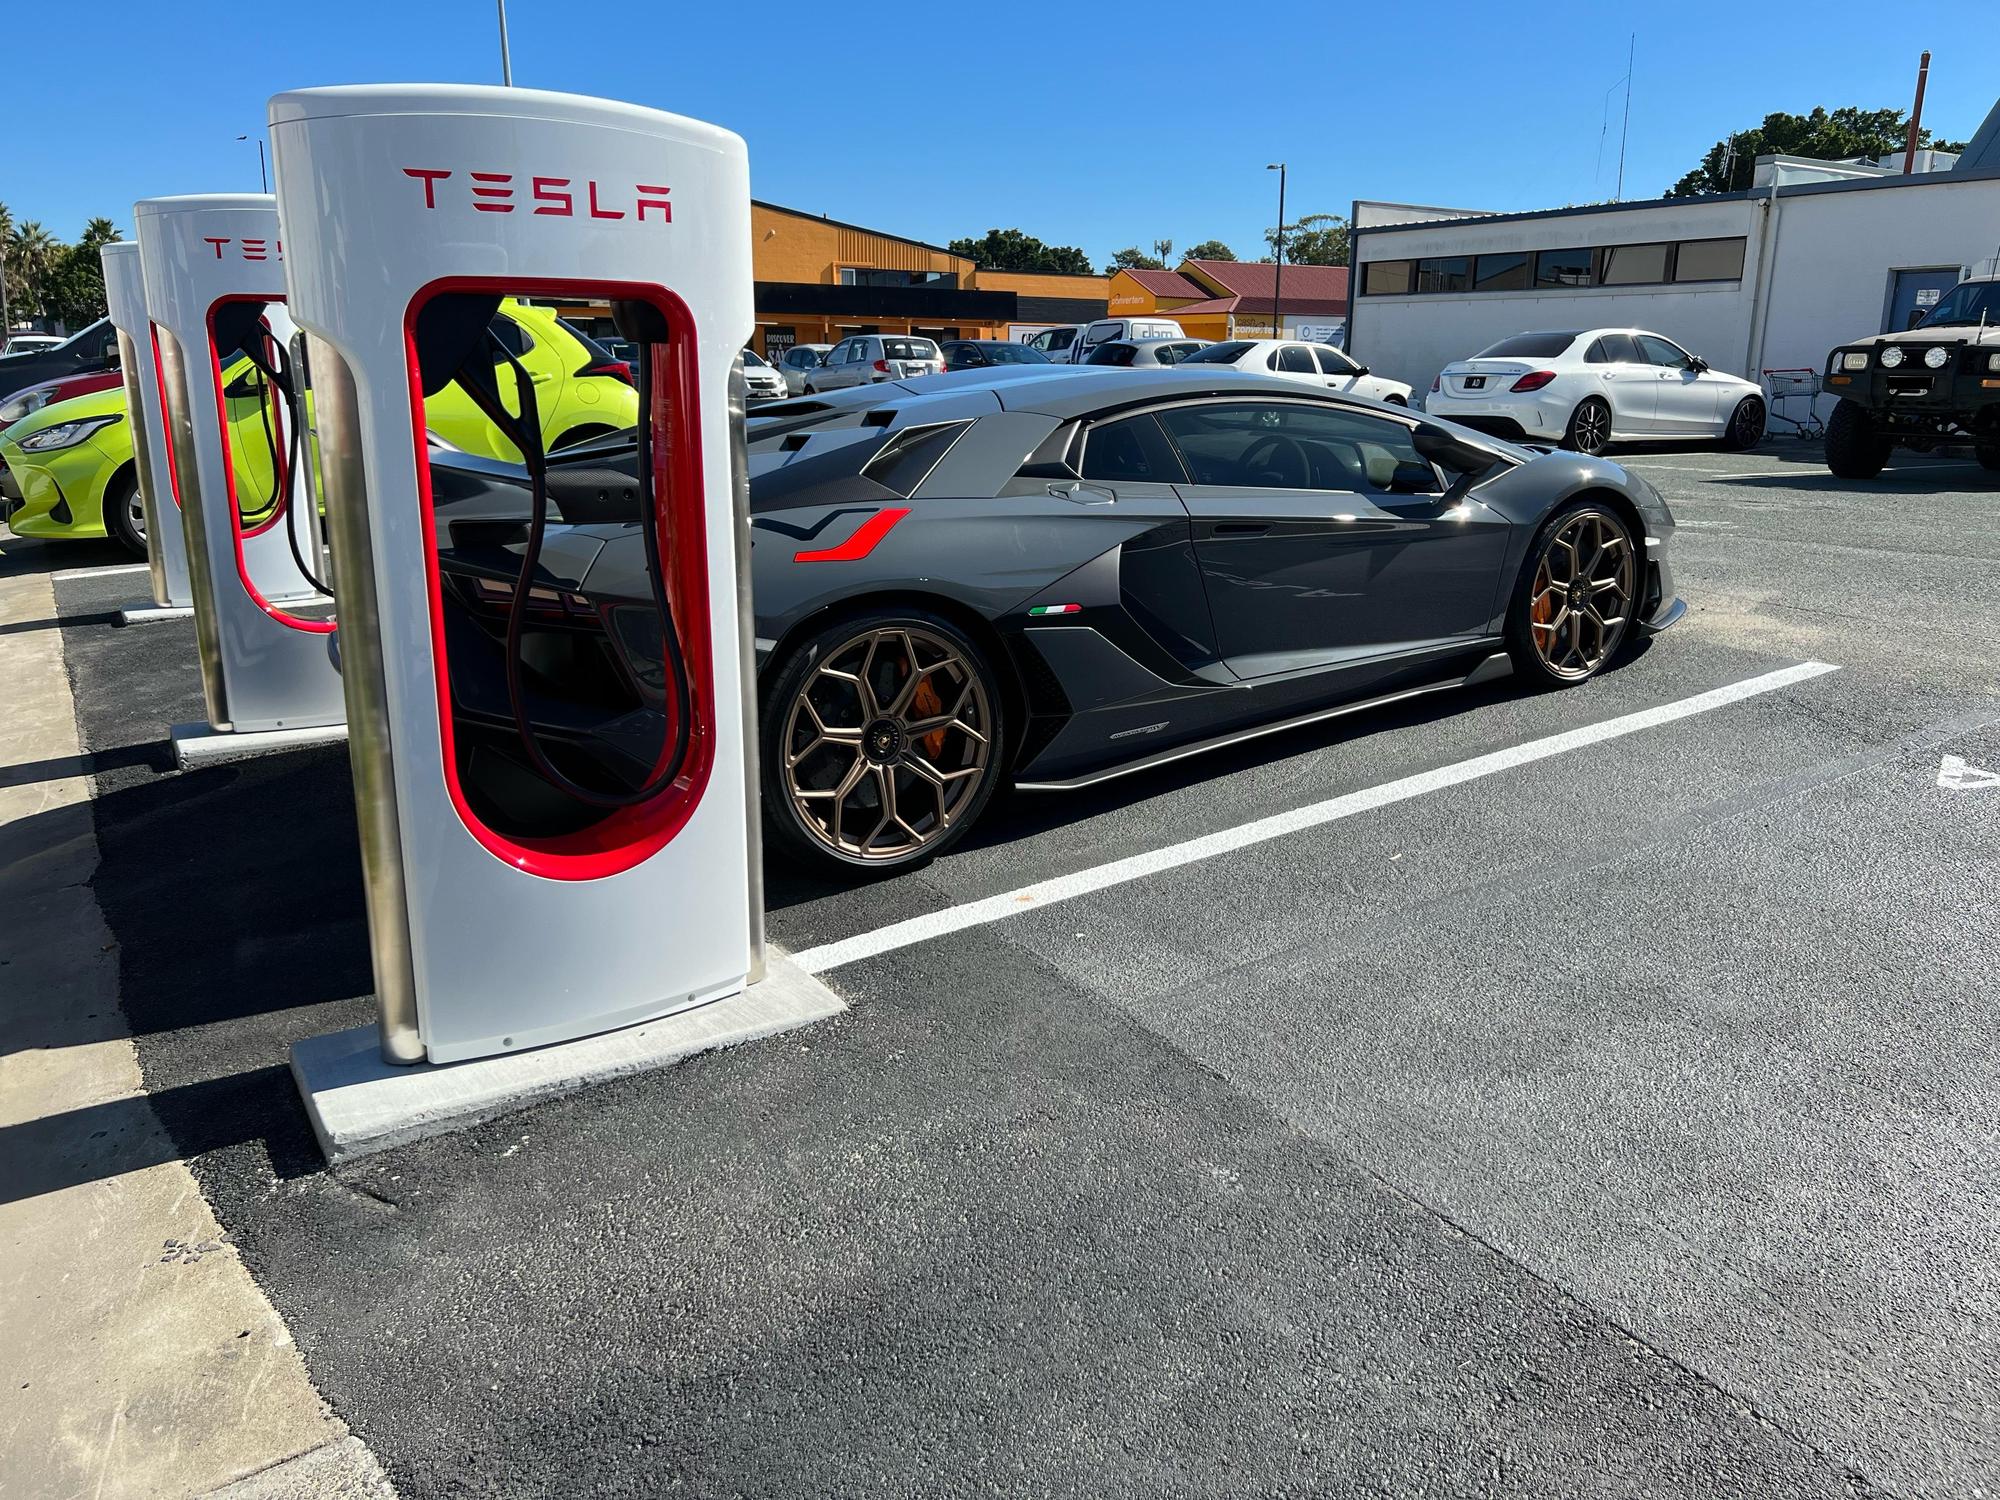 Tesla Superchargers are still being ICE’d in 2023